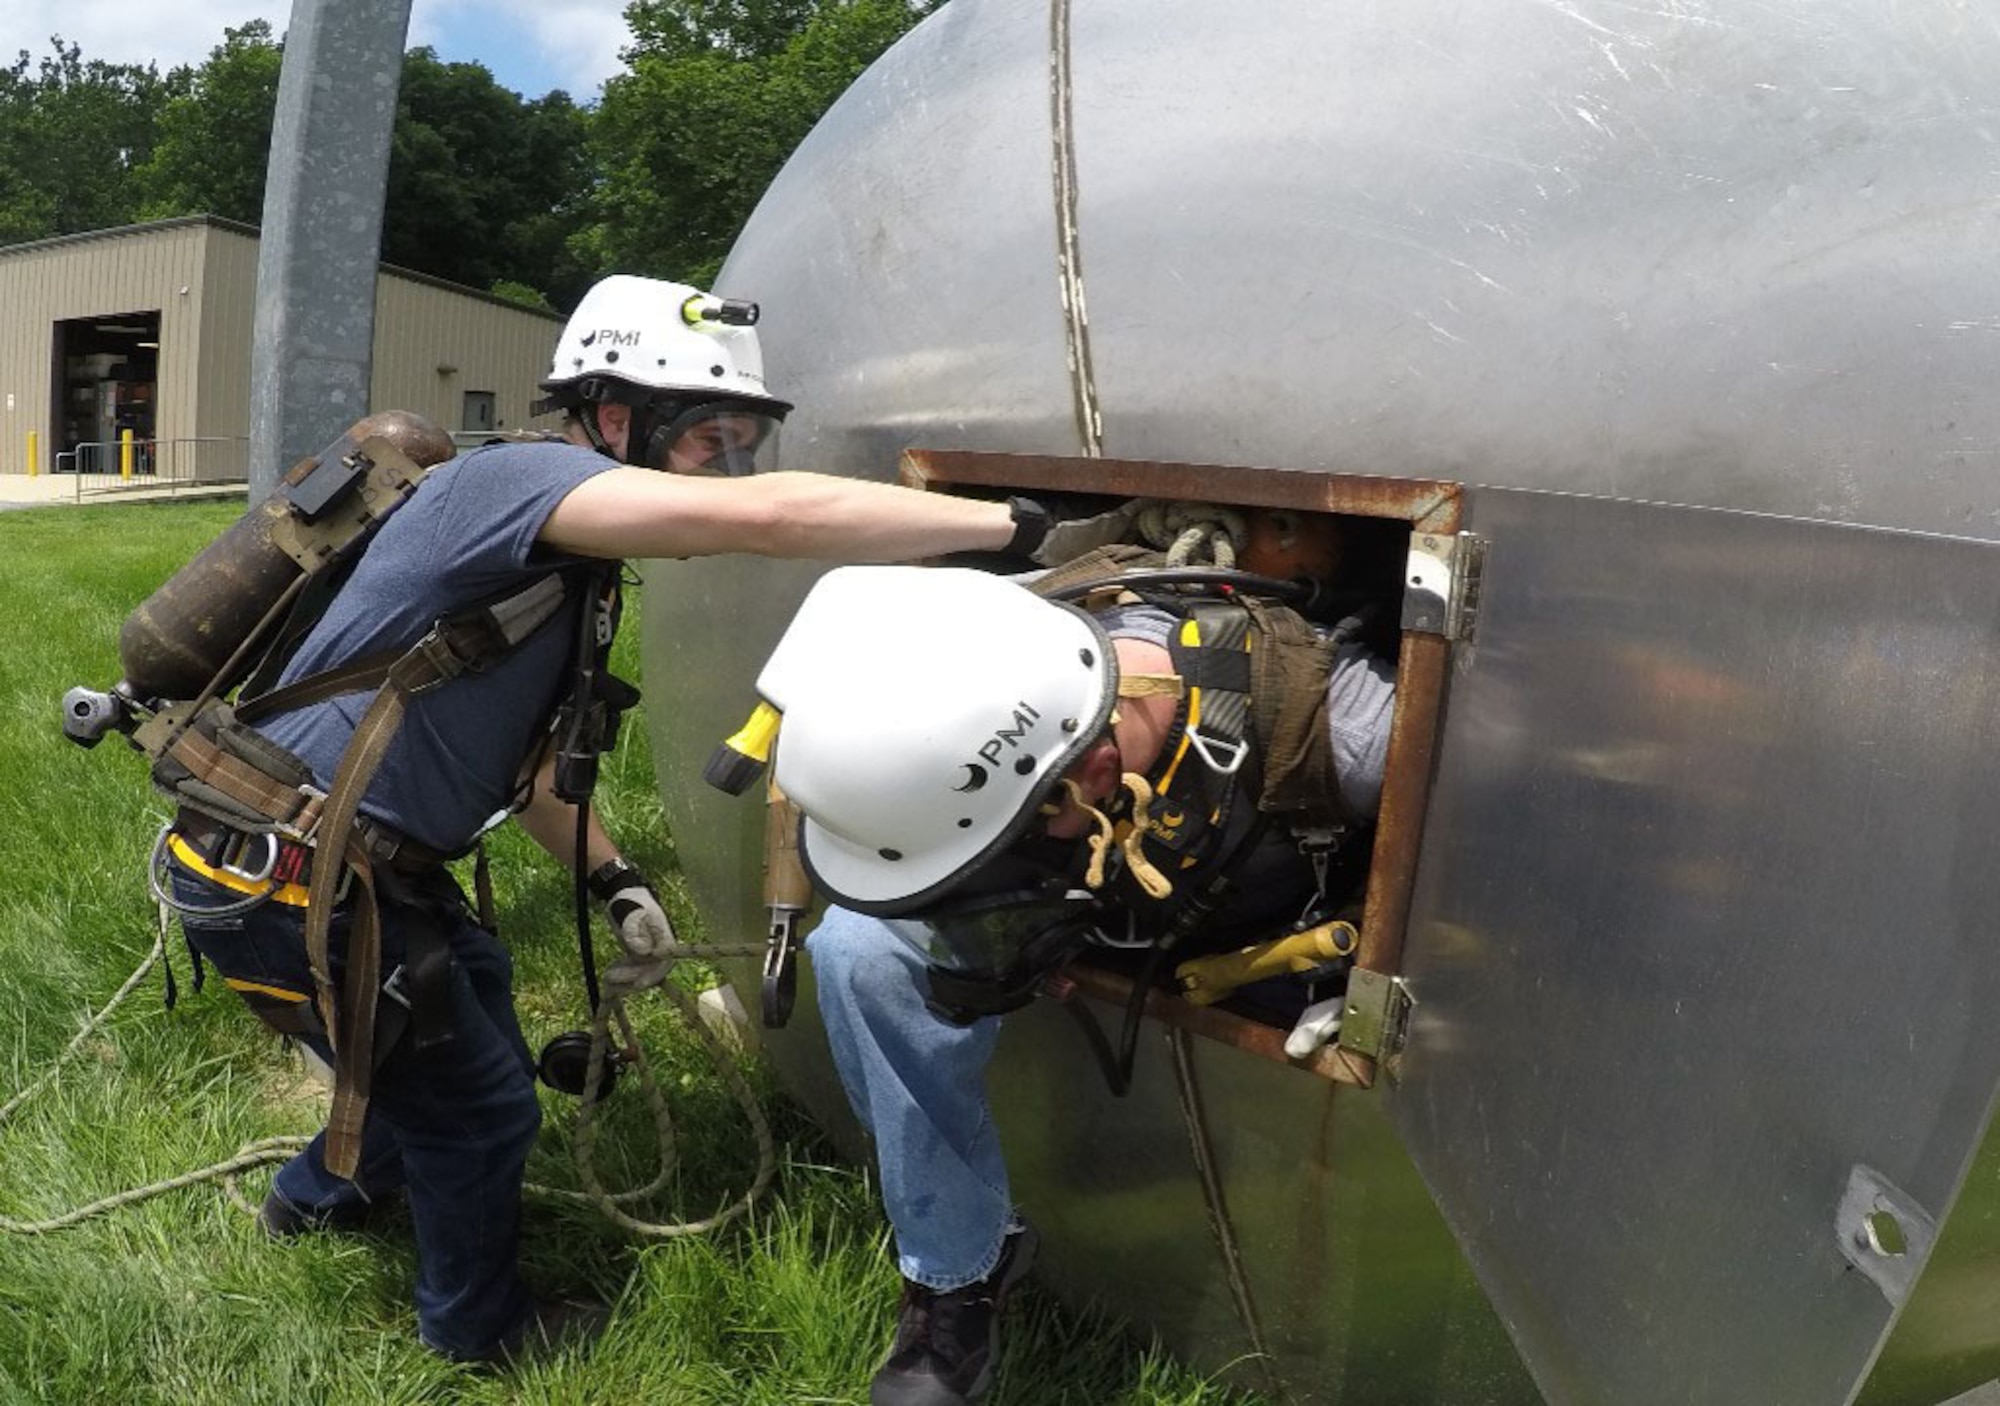 Addison Spicer, left, and Cameron Butcher, current and former members of the White Oak Rescue Team (WORT), respectively, conduct confined space training. The team was established in the late 1990s at Arnold Engineering Development Complex Hypervelocity Wind Tunnel 9 in White Oak, Maryland, to provide immediate lifesaving actions in the event of an emergency until county emergency responders arrive onsite. The WORT is trained to administer first aid, including CPR and automated external defibrillator, until the arrival of professional medical response personnel. (U.S. Air Force photo)